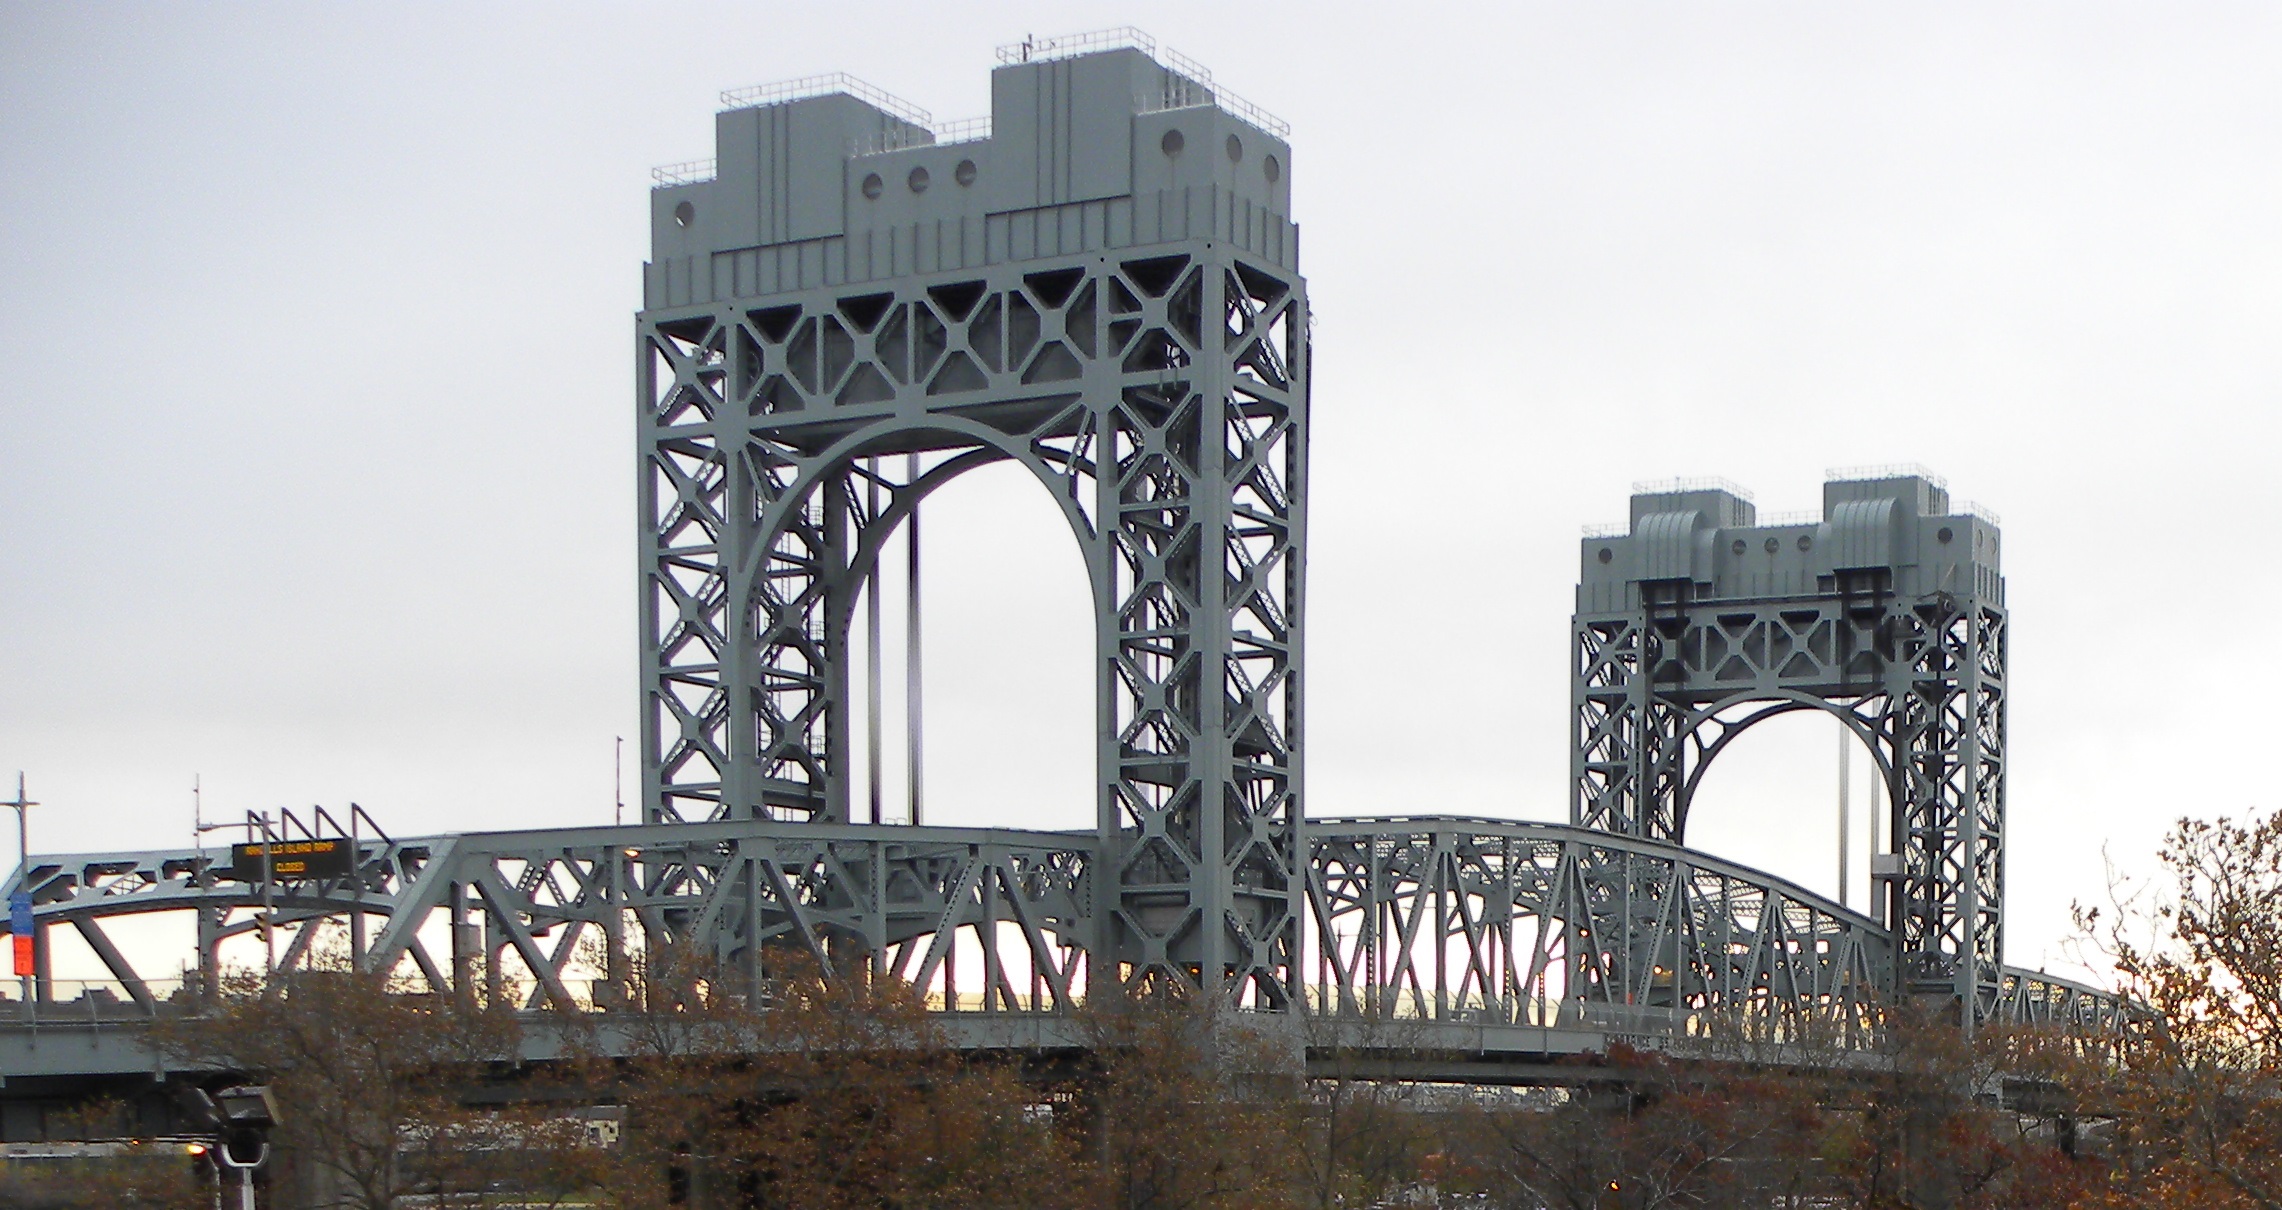 Bridge Lift Testing at RFK Bridge Manhattan Span Scheduled for Early Morning Hours of Tuesday, April 26